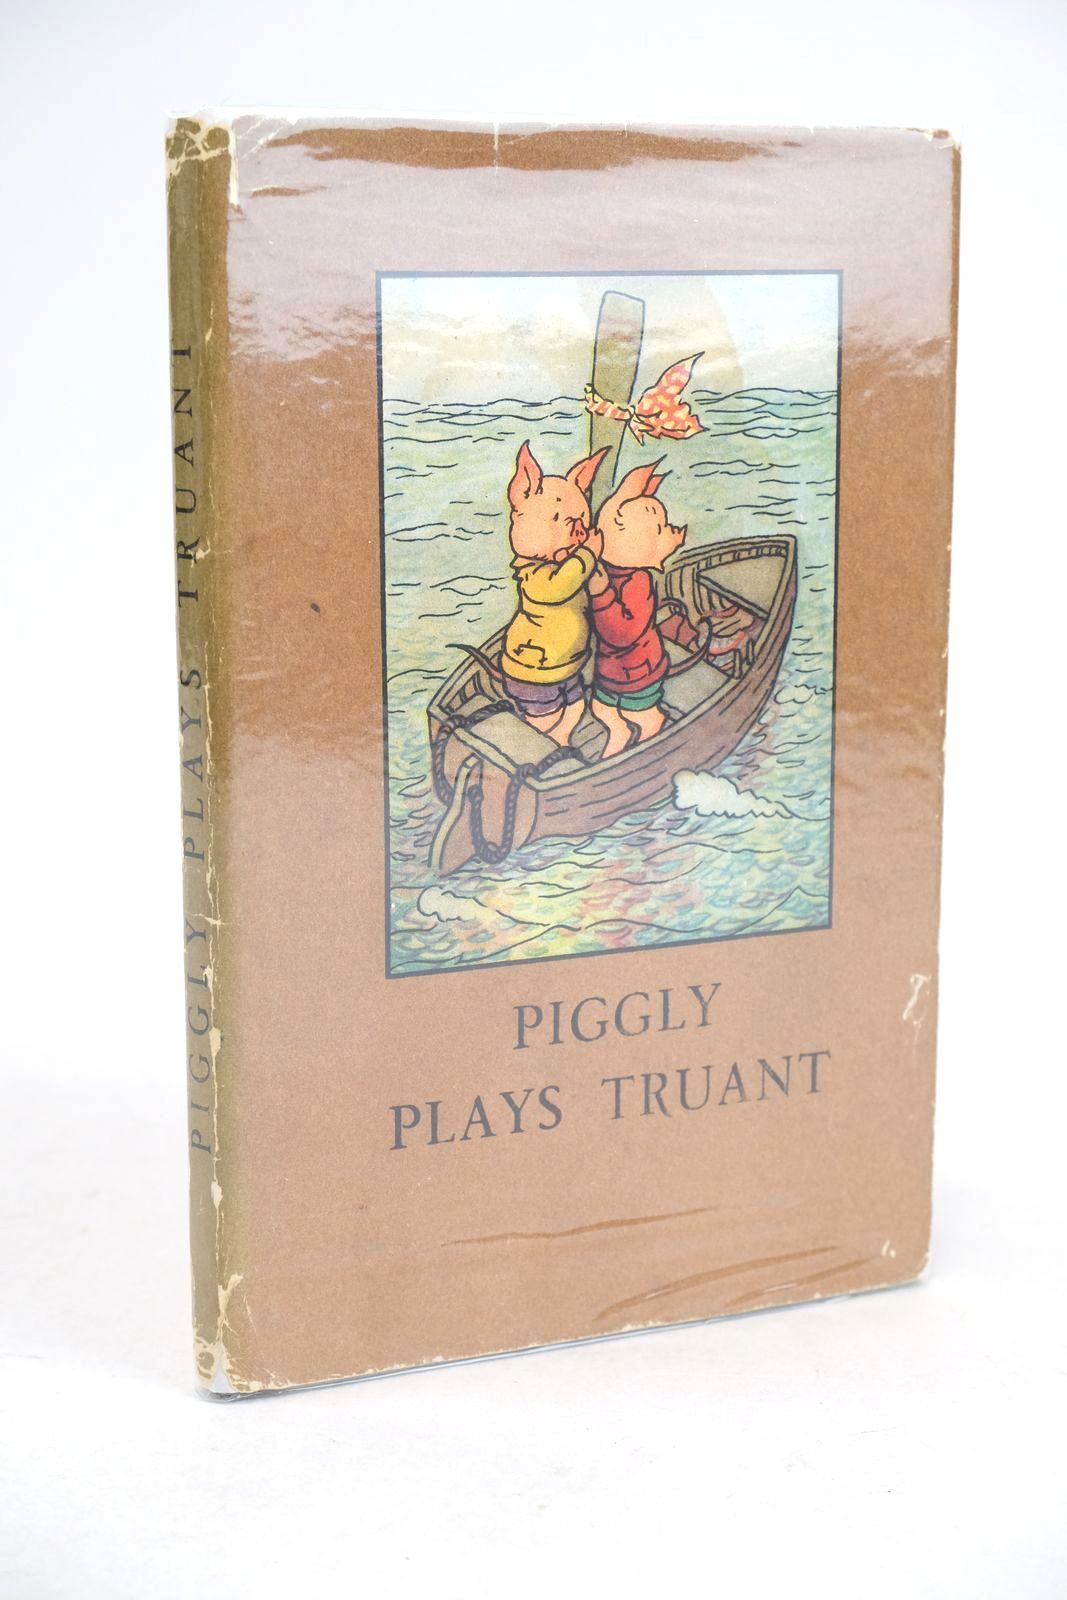 Photo of PIGGLY PLAYS TRUANT written by Macgregor, A.J. Perring, W. illustrated by Macgregor, A.J. published by Wills &amp; Hepworth Ltd. (STOCK CODE: 1325478)  for sale by Stella & Rose's Books